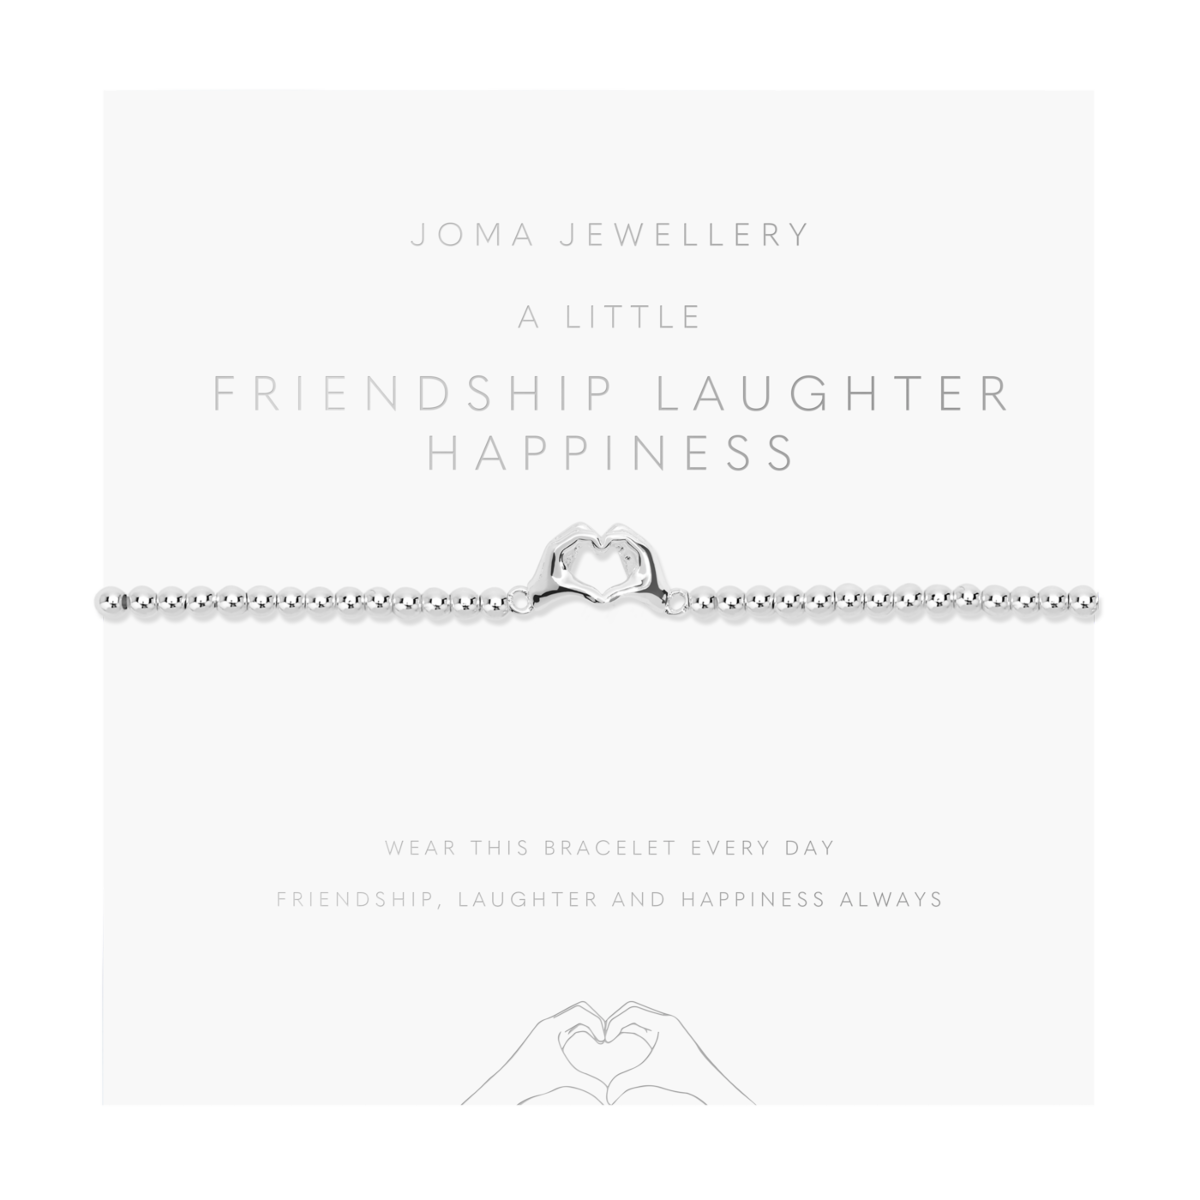 JOMA JEWELLERY | A LITTLE | FRIENDSHIP LAUGHTER HAPPINESS BRACELET